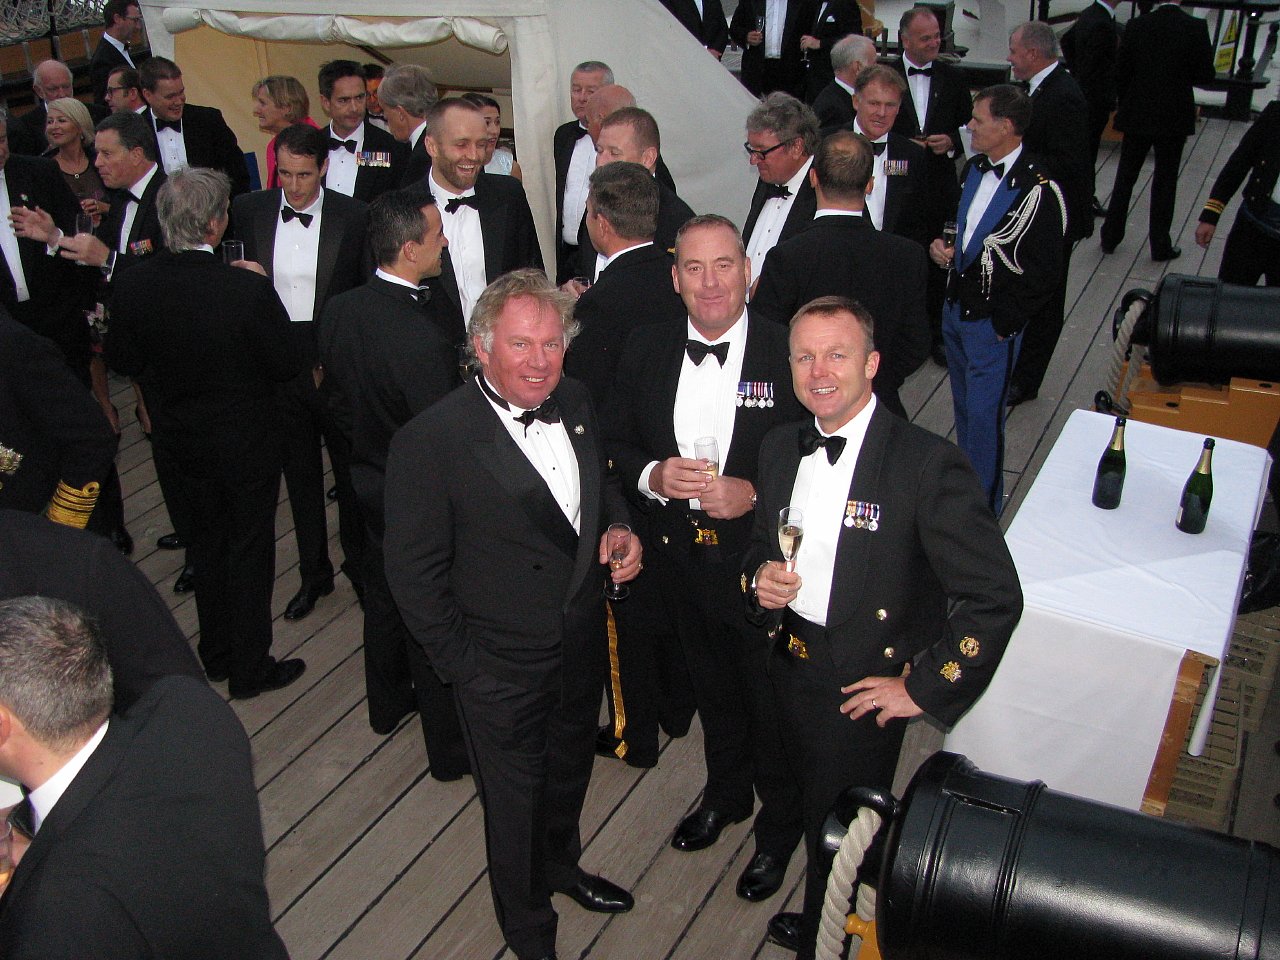 Project+Vernon+charity+dinner+on+board+HMS+Victory+11+Sep+2014+(46).jpg